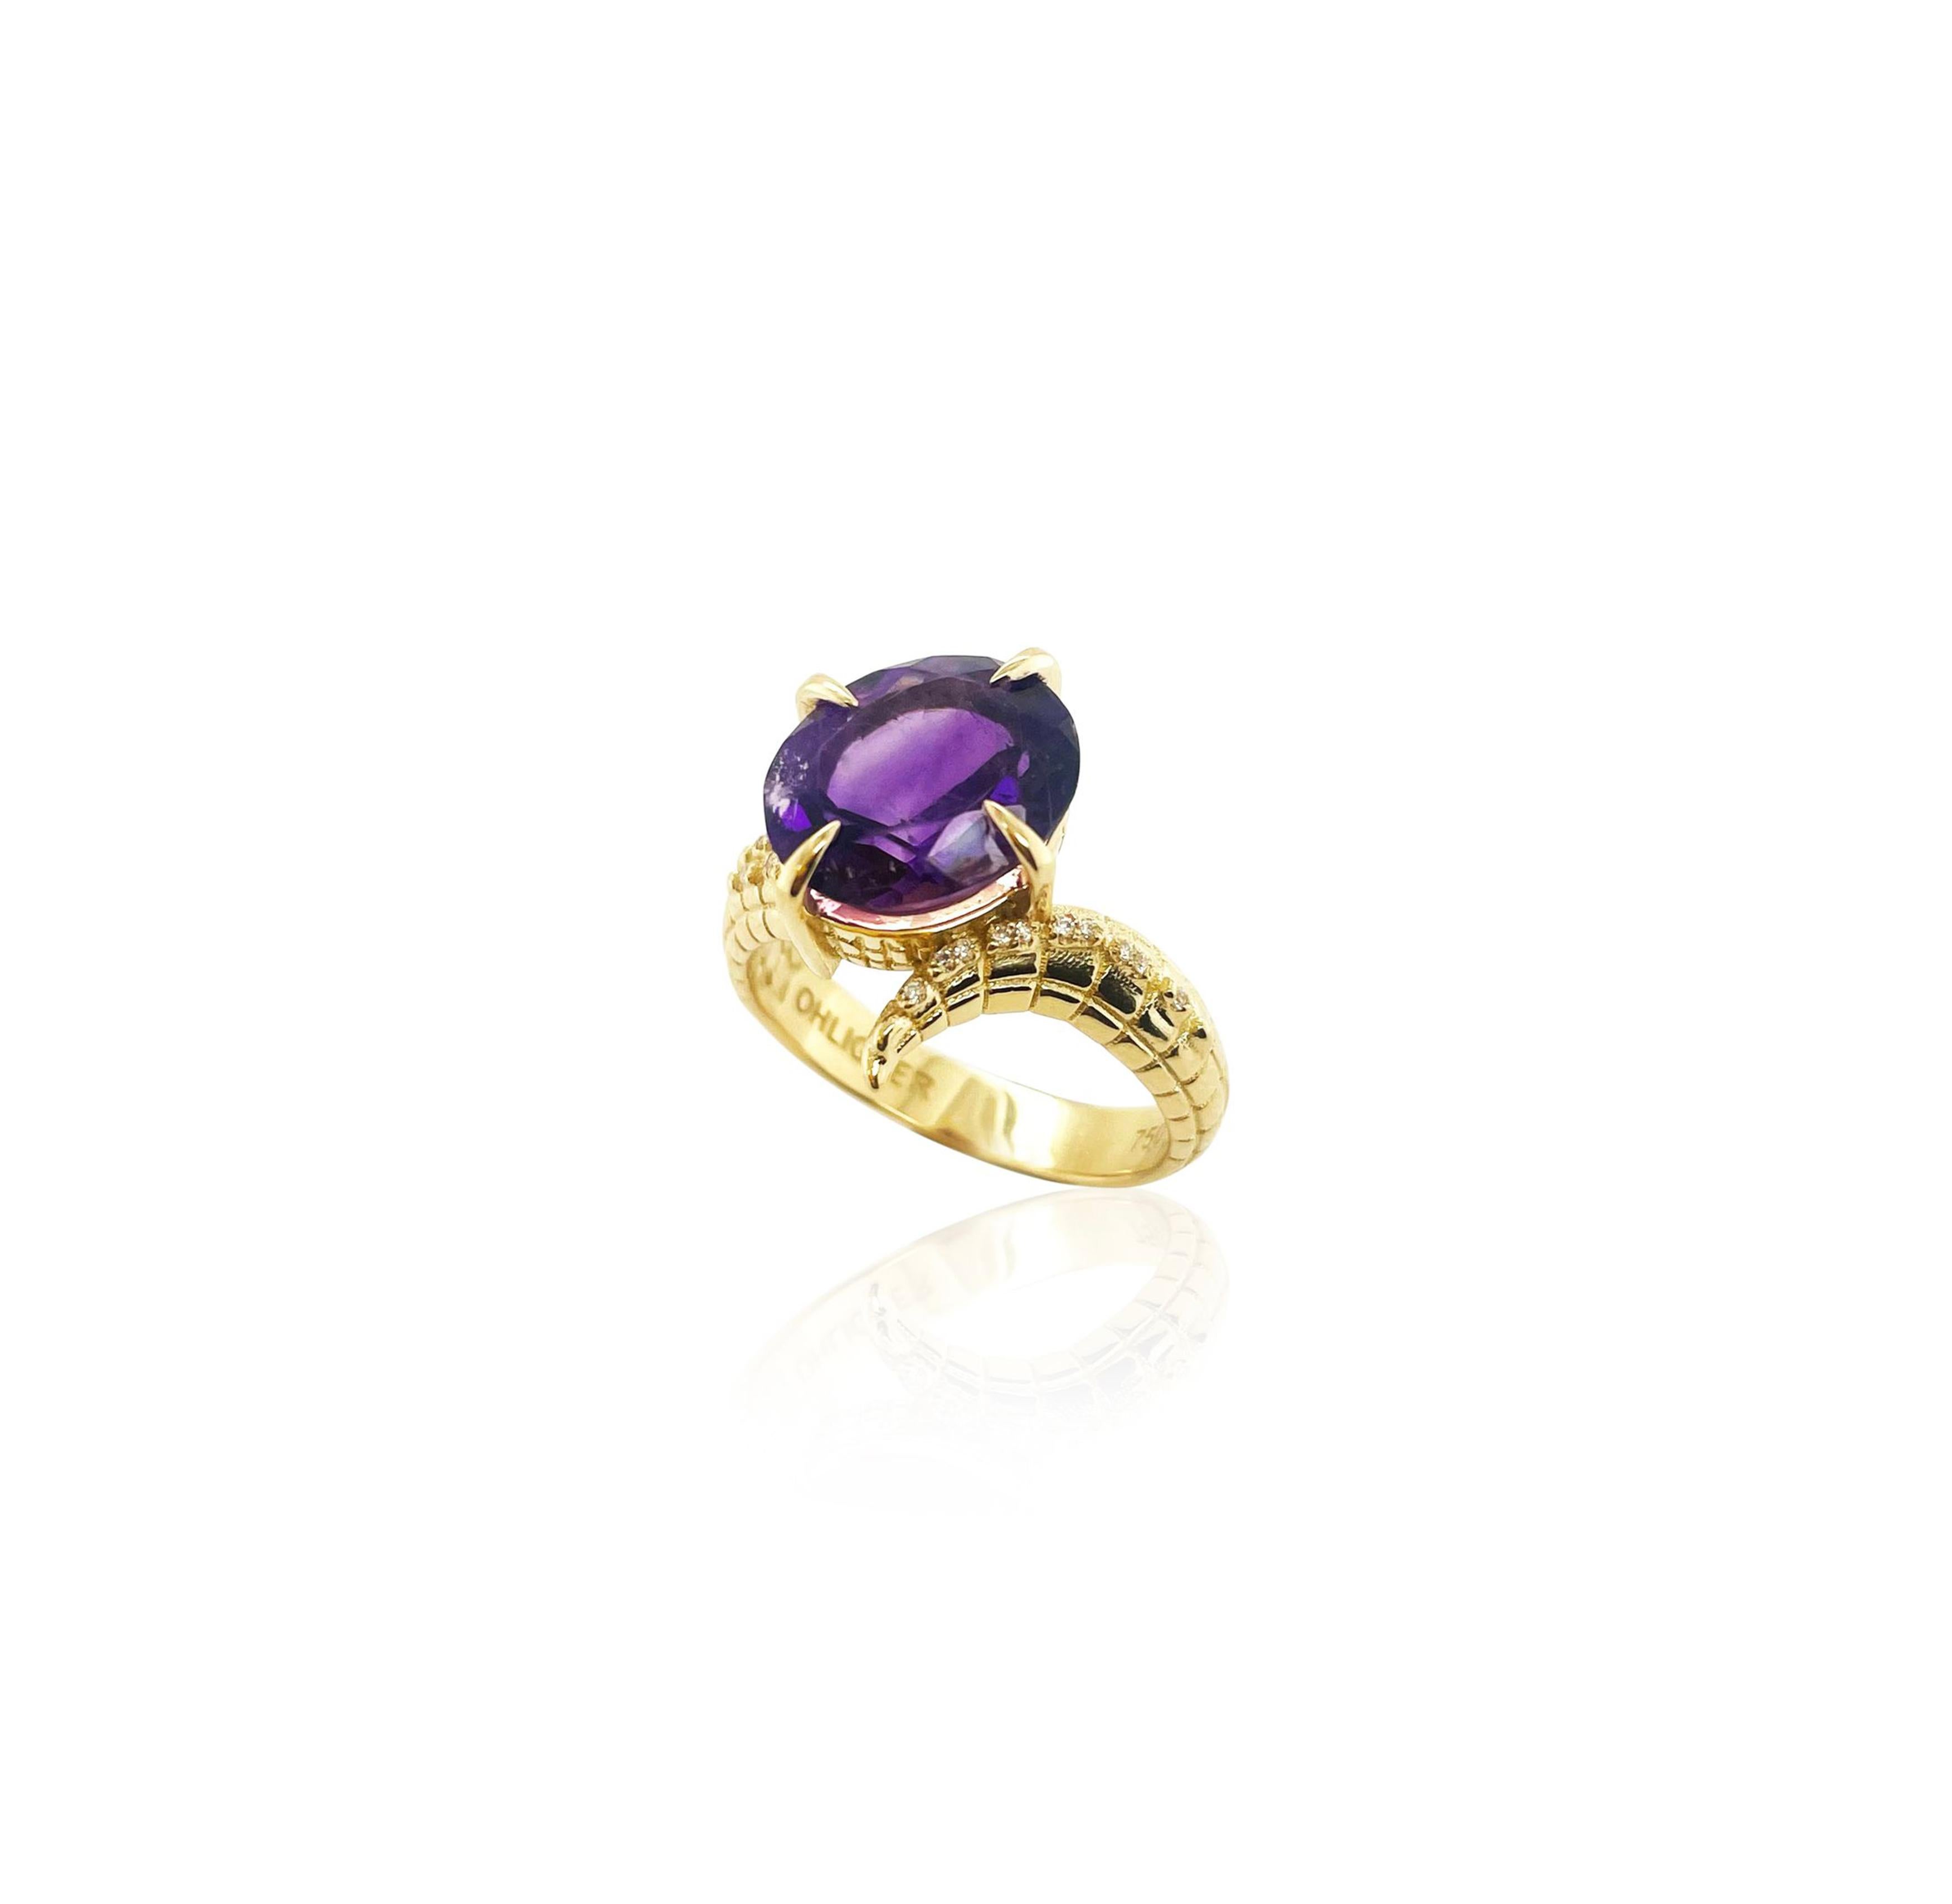 For Sale:  Croc Dragon Tail Ring with 5ct Oval Cut Amethyst with diamond spikes  6